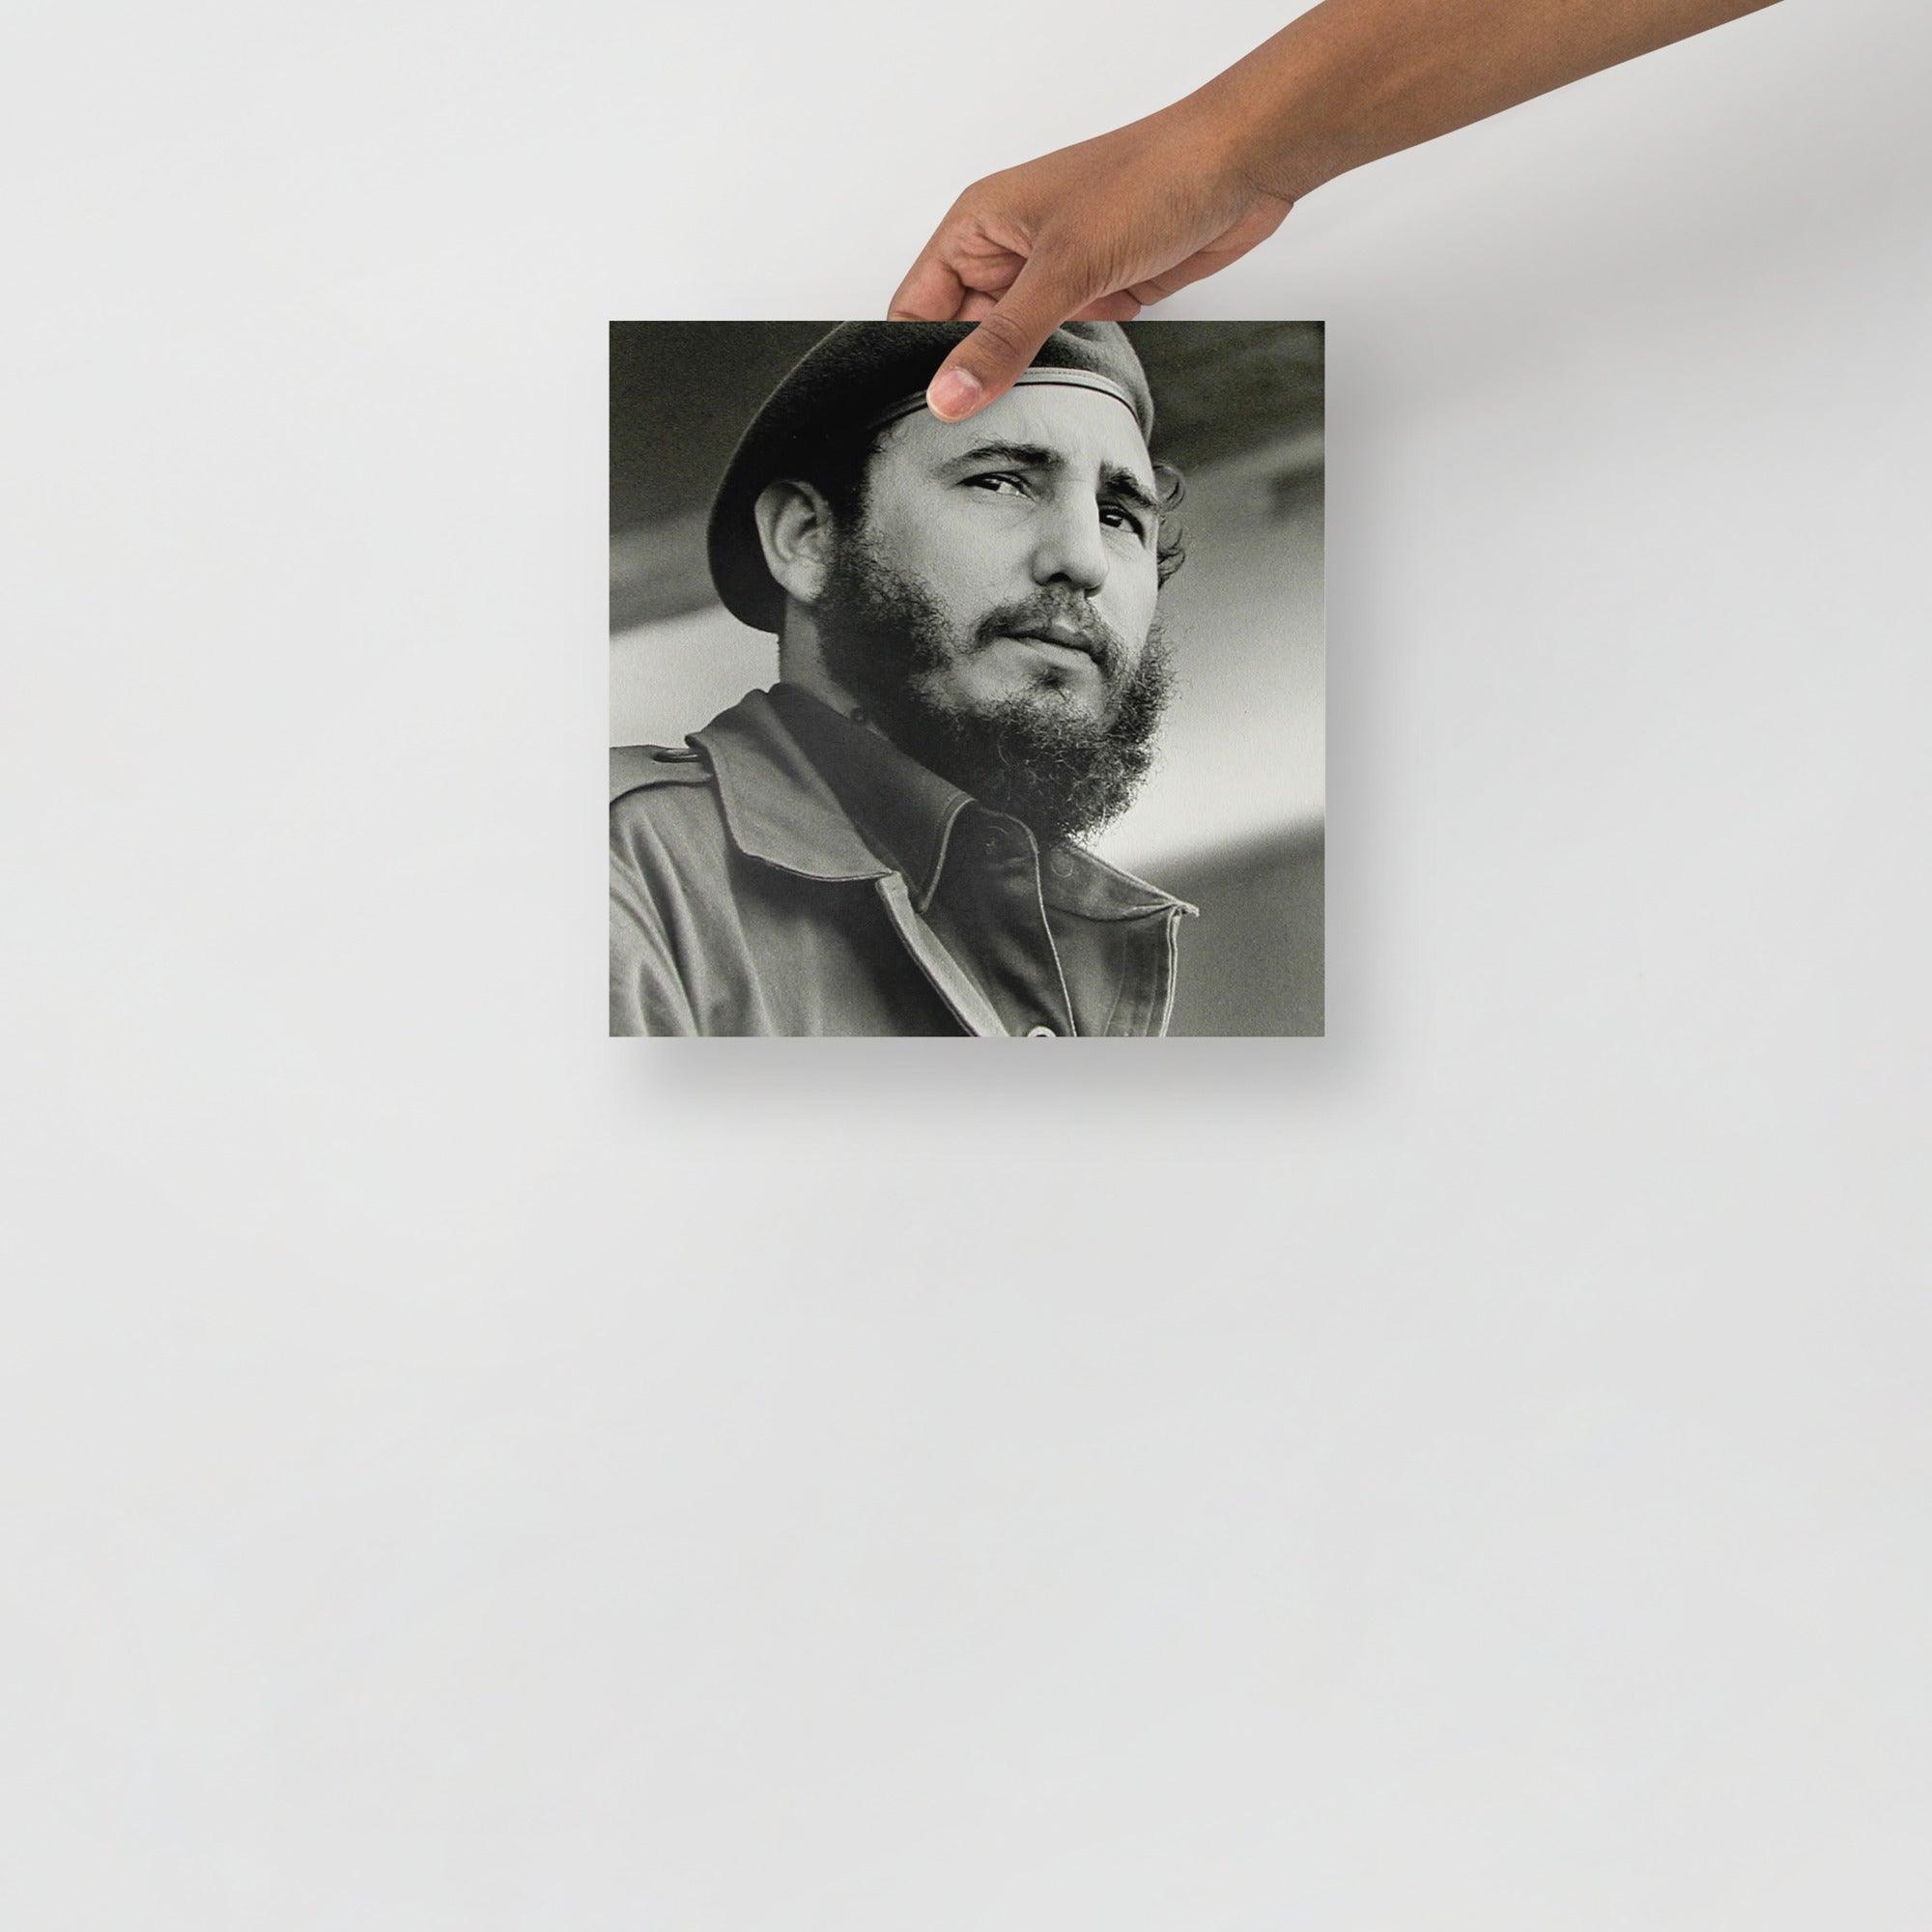 A Fidel Castro poster on a plain backdrop in size 10x10”.